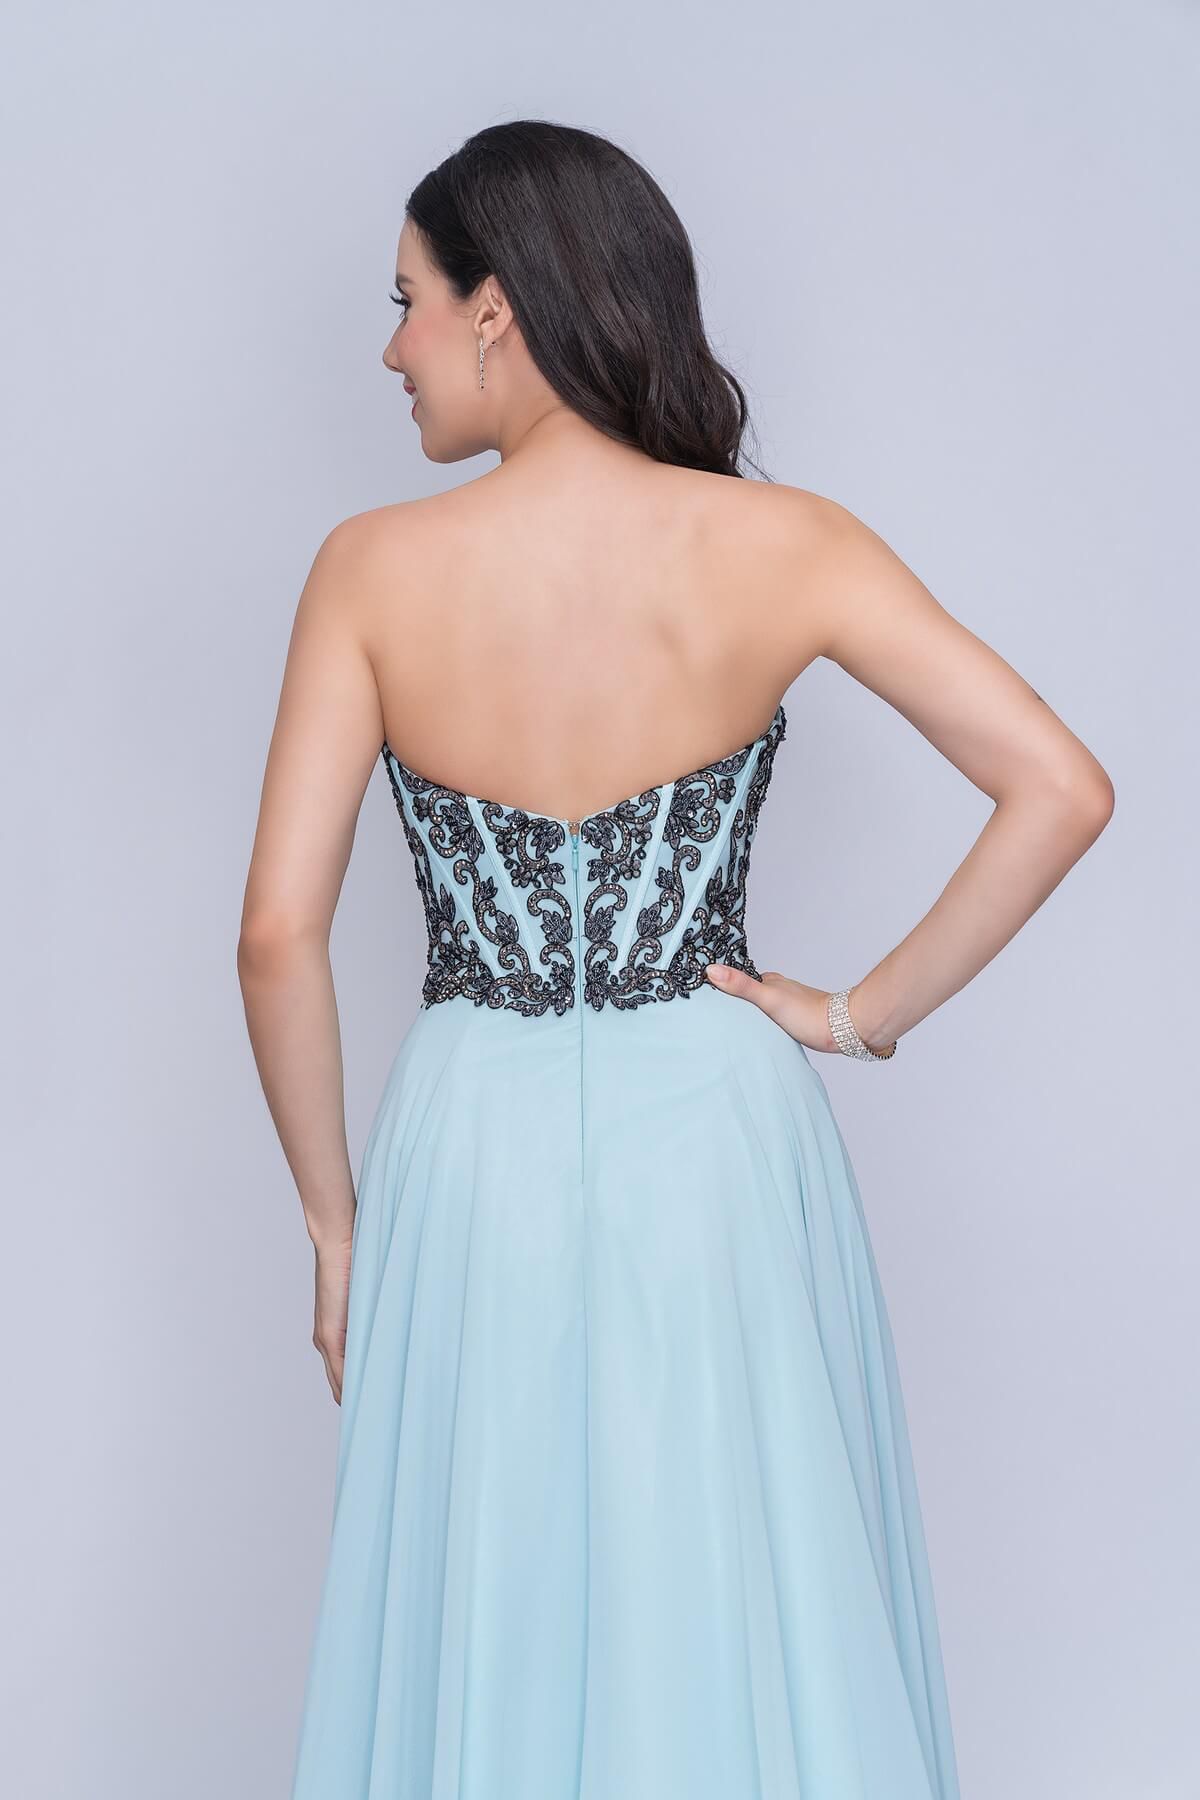 Style 3140 Nina Canacci Size 6 Prom Strapless Light Blue A-line Dress on Queenly